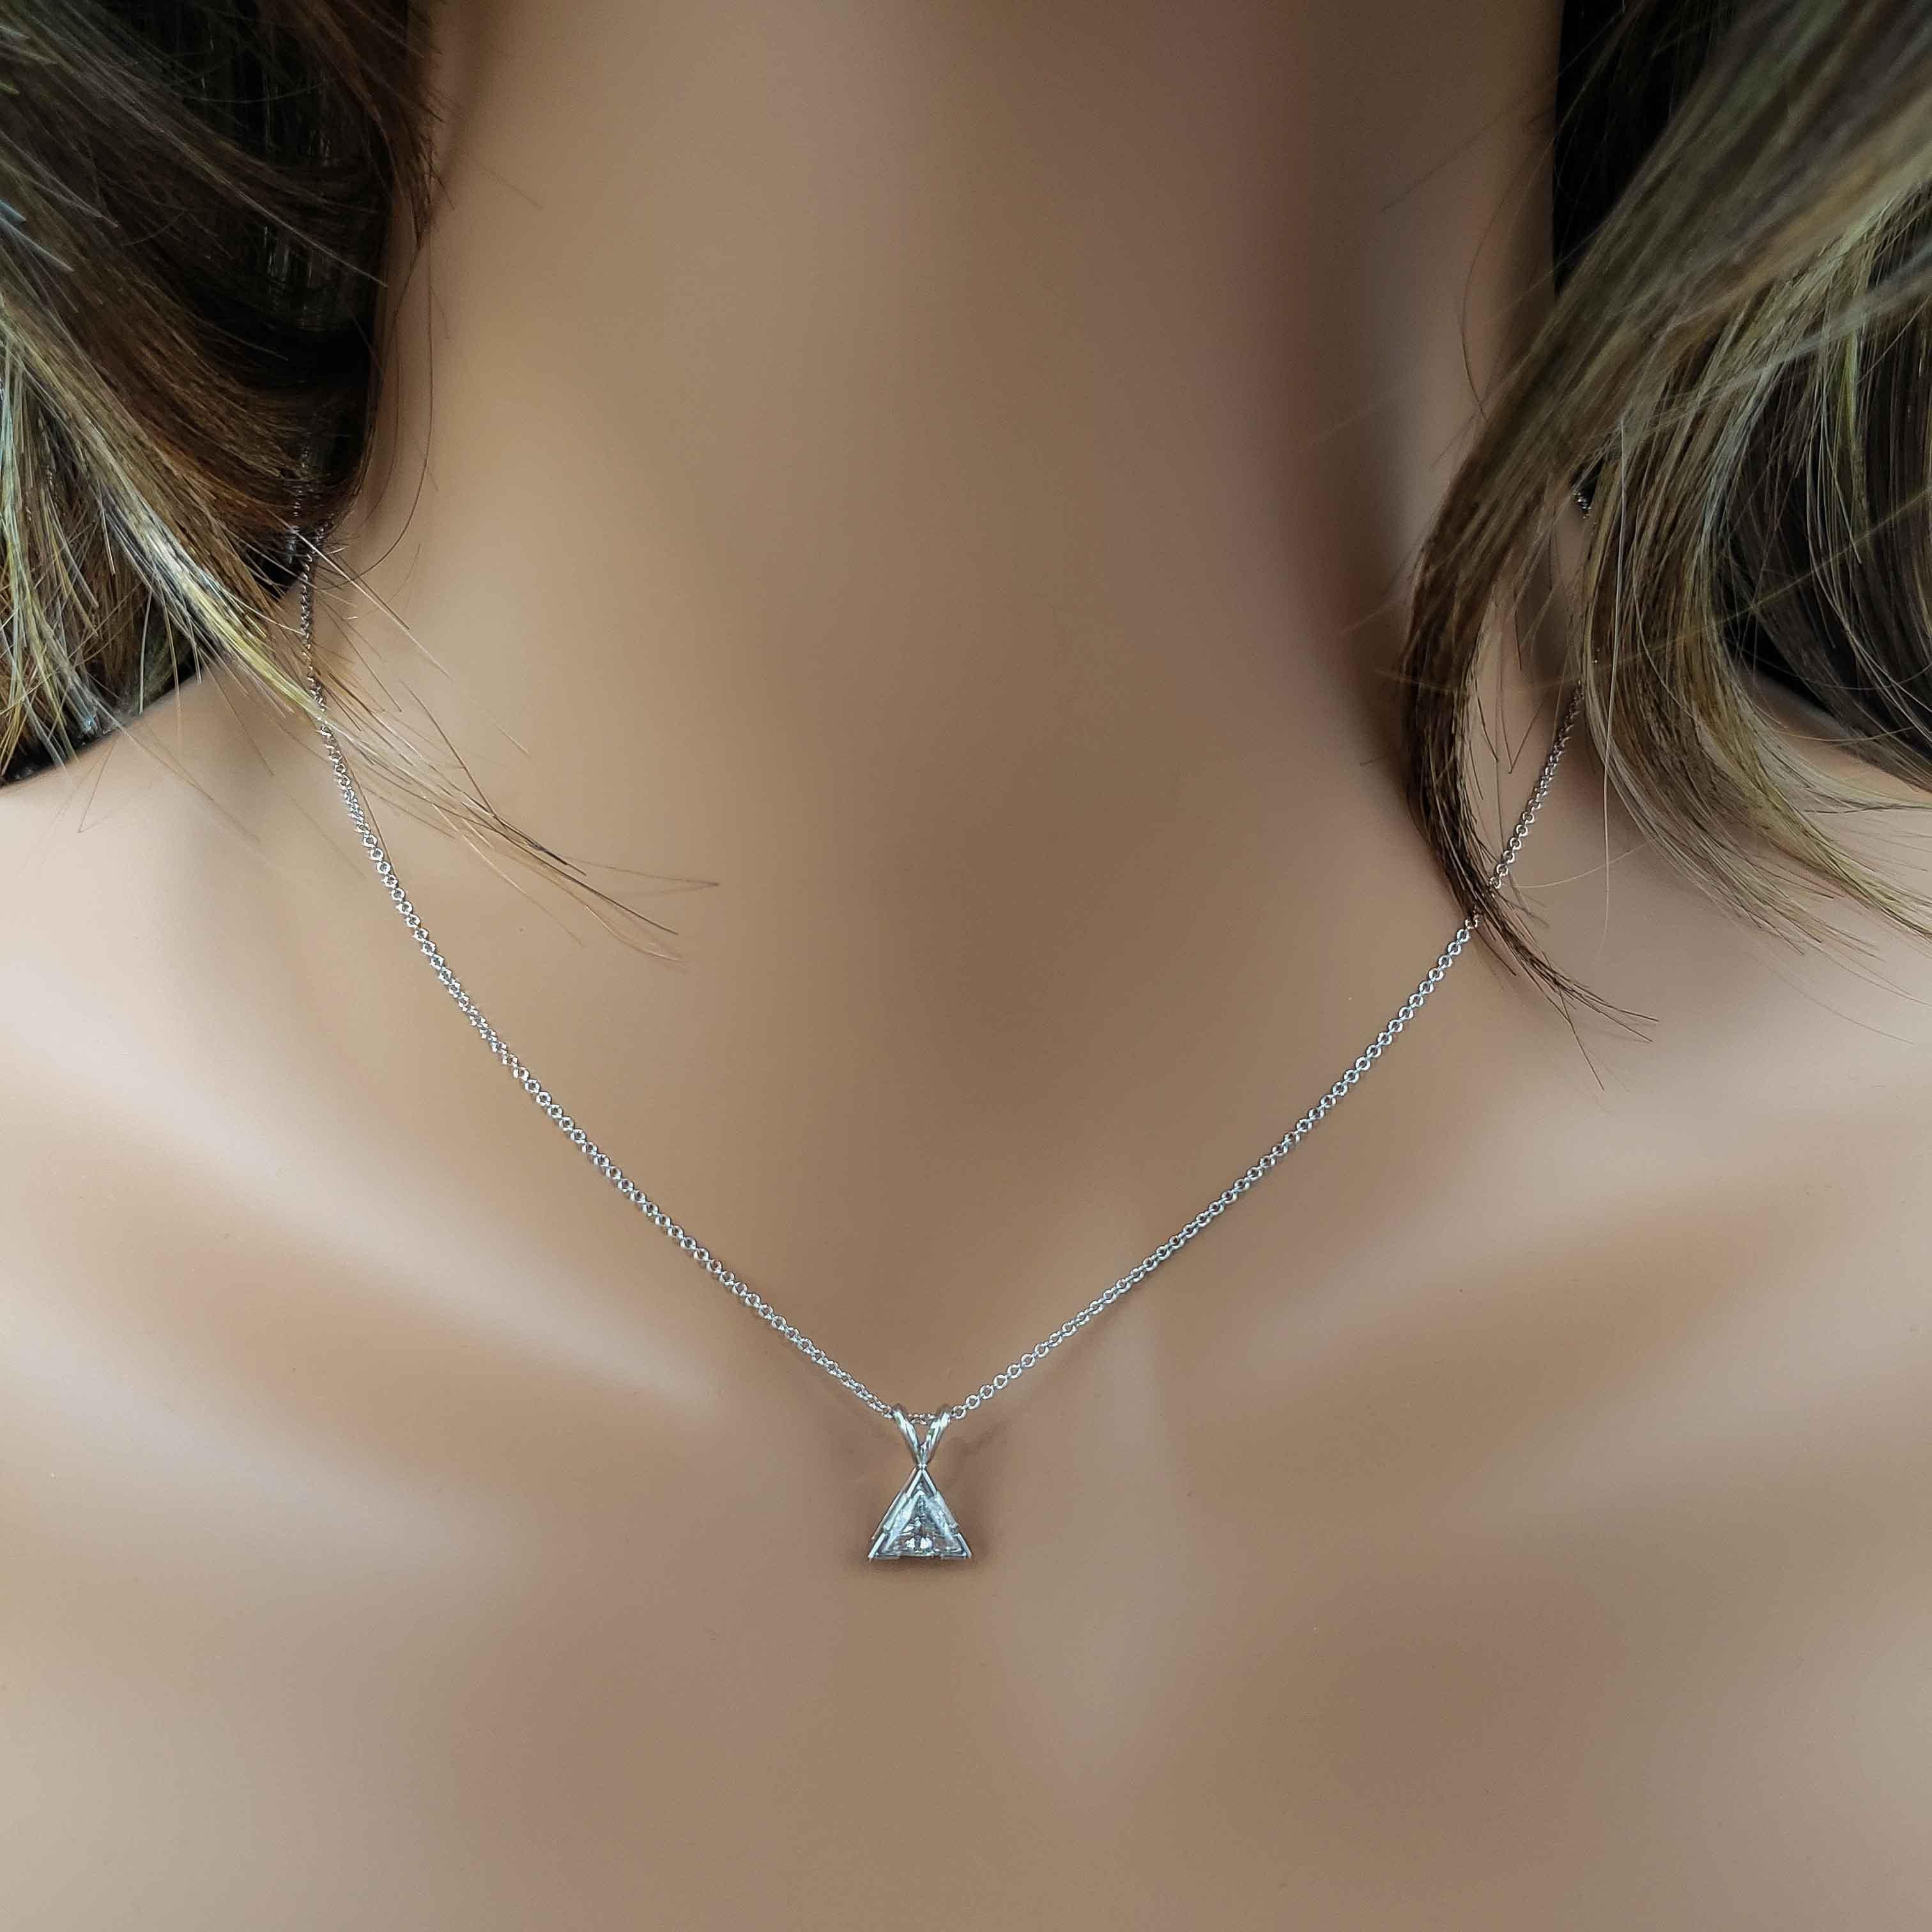 A fashionable yet simple pendant necklace showcasing a single 0.51 carat trillion diamond, set in a 14K White Gold mounting. Suspended on a 16 inches white gold chain. Perfect for your everyday use. 

Roman Malakov is a custom house, specializing in